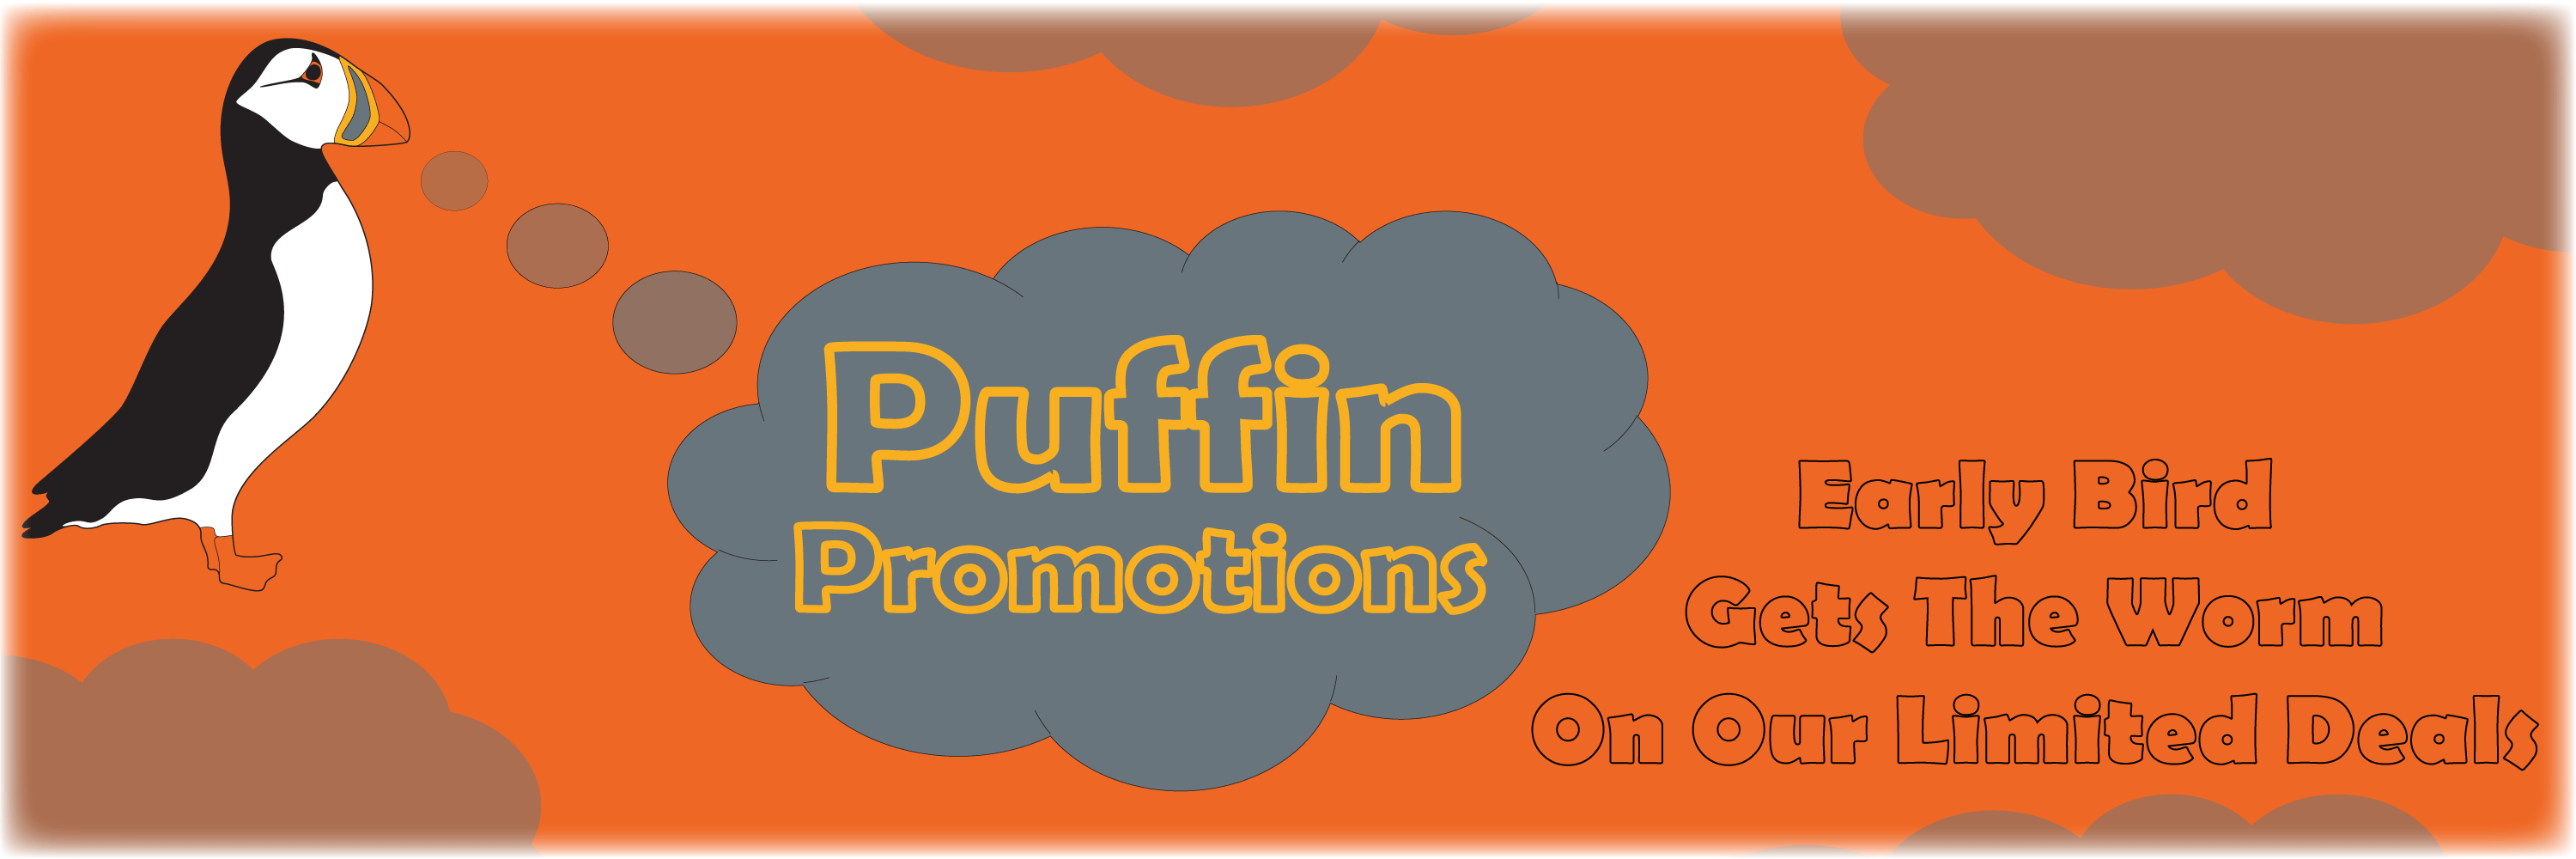 Puffin-Promo-Deals-PAge-Ad-final.gif